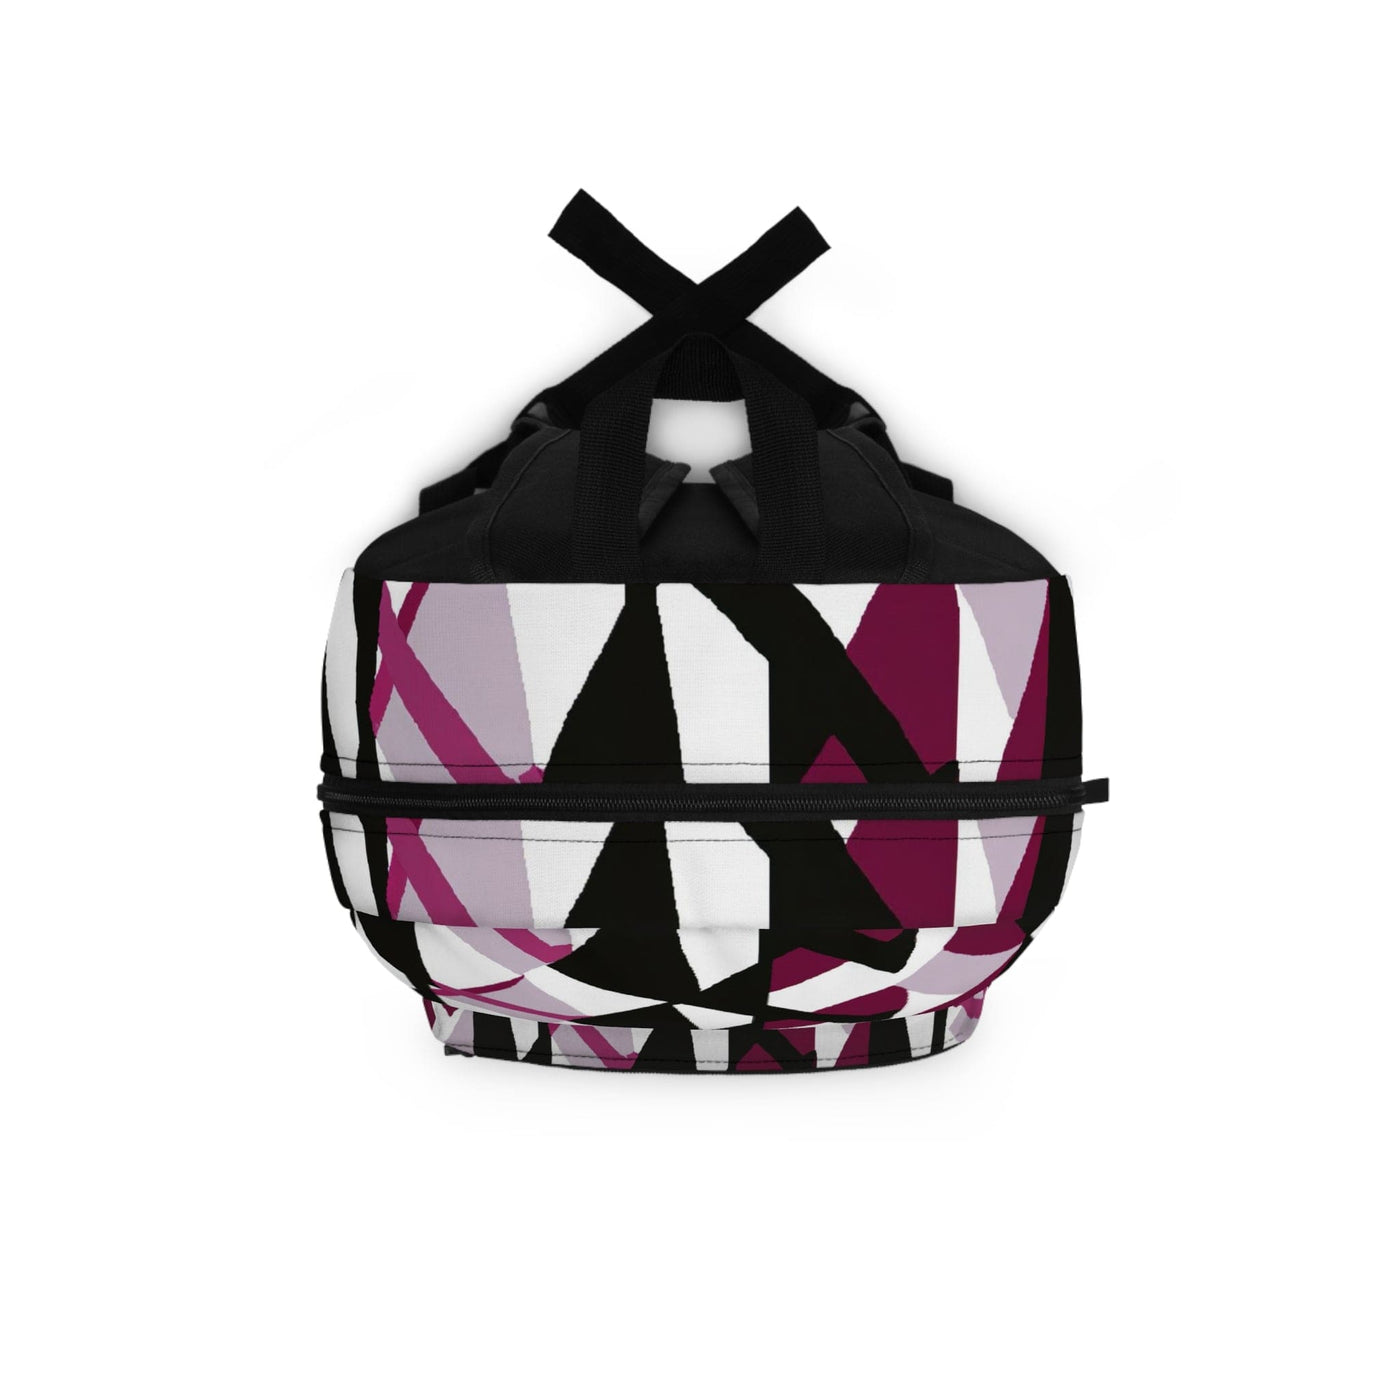 Backpack - Large Water - resistant Bag Mauve Pink And Black Geometric Pattern